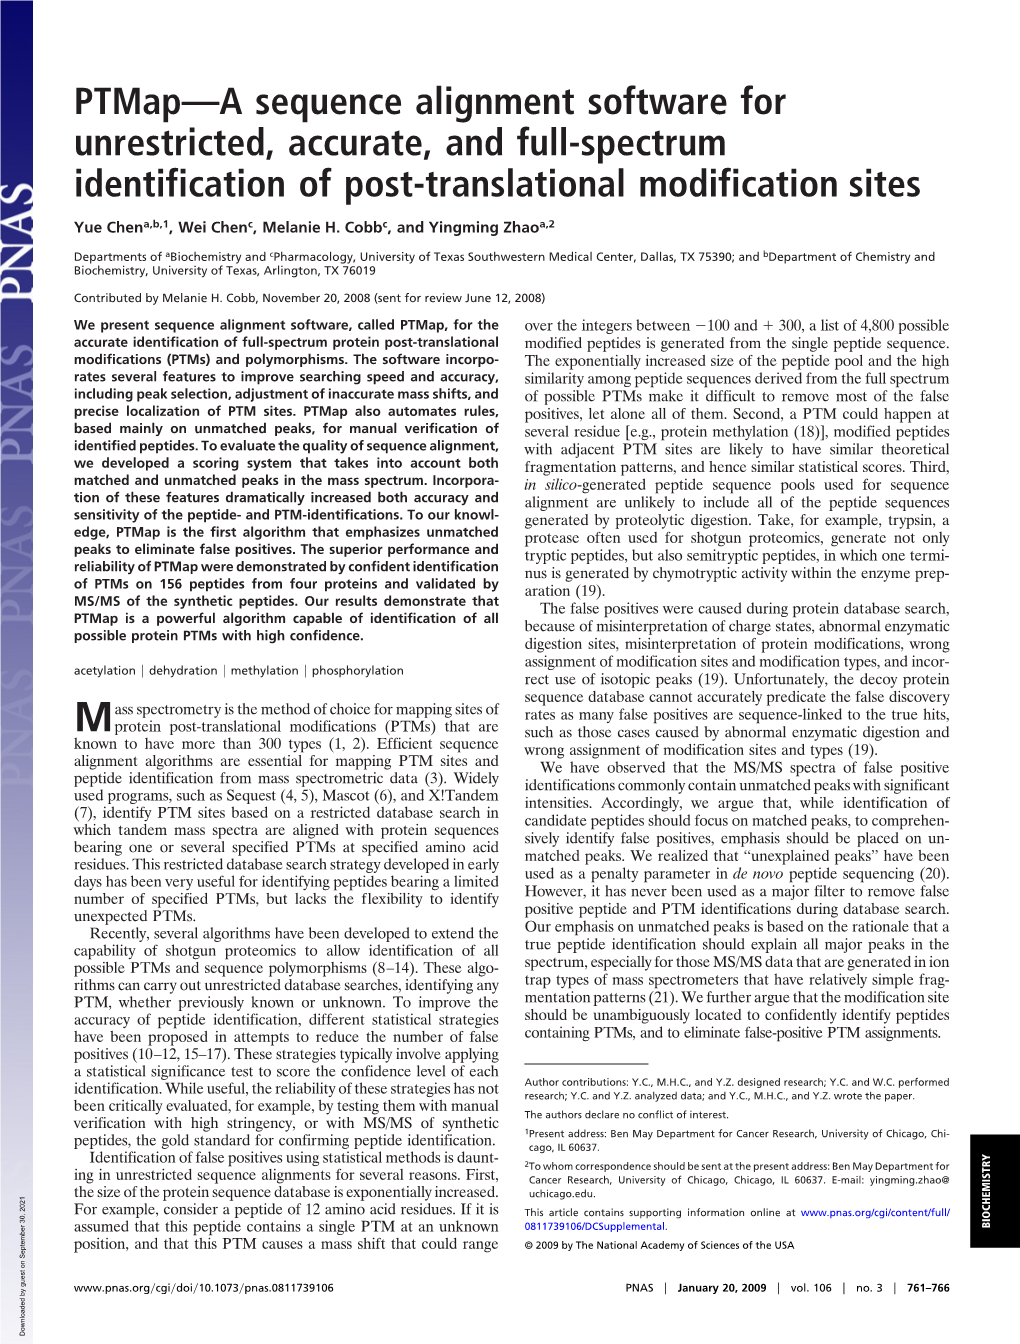 Ptmap—A Sequence Alignment Software for Unrestricted, Accurate, and Full-Spectrum Identification of Post-Translational Modification Sites